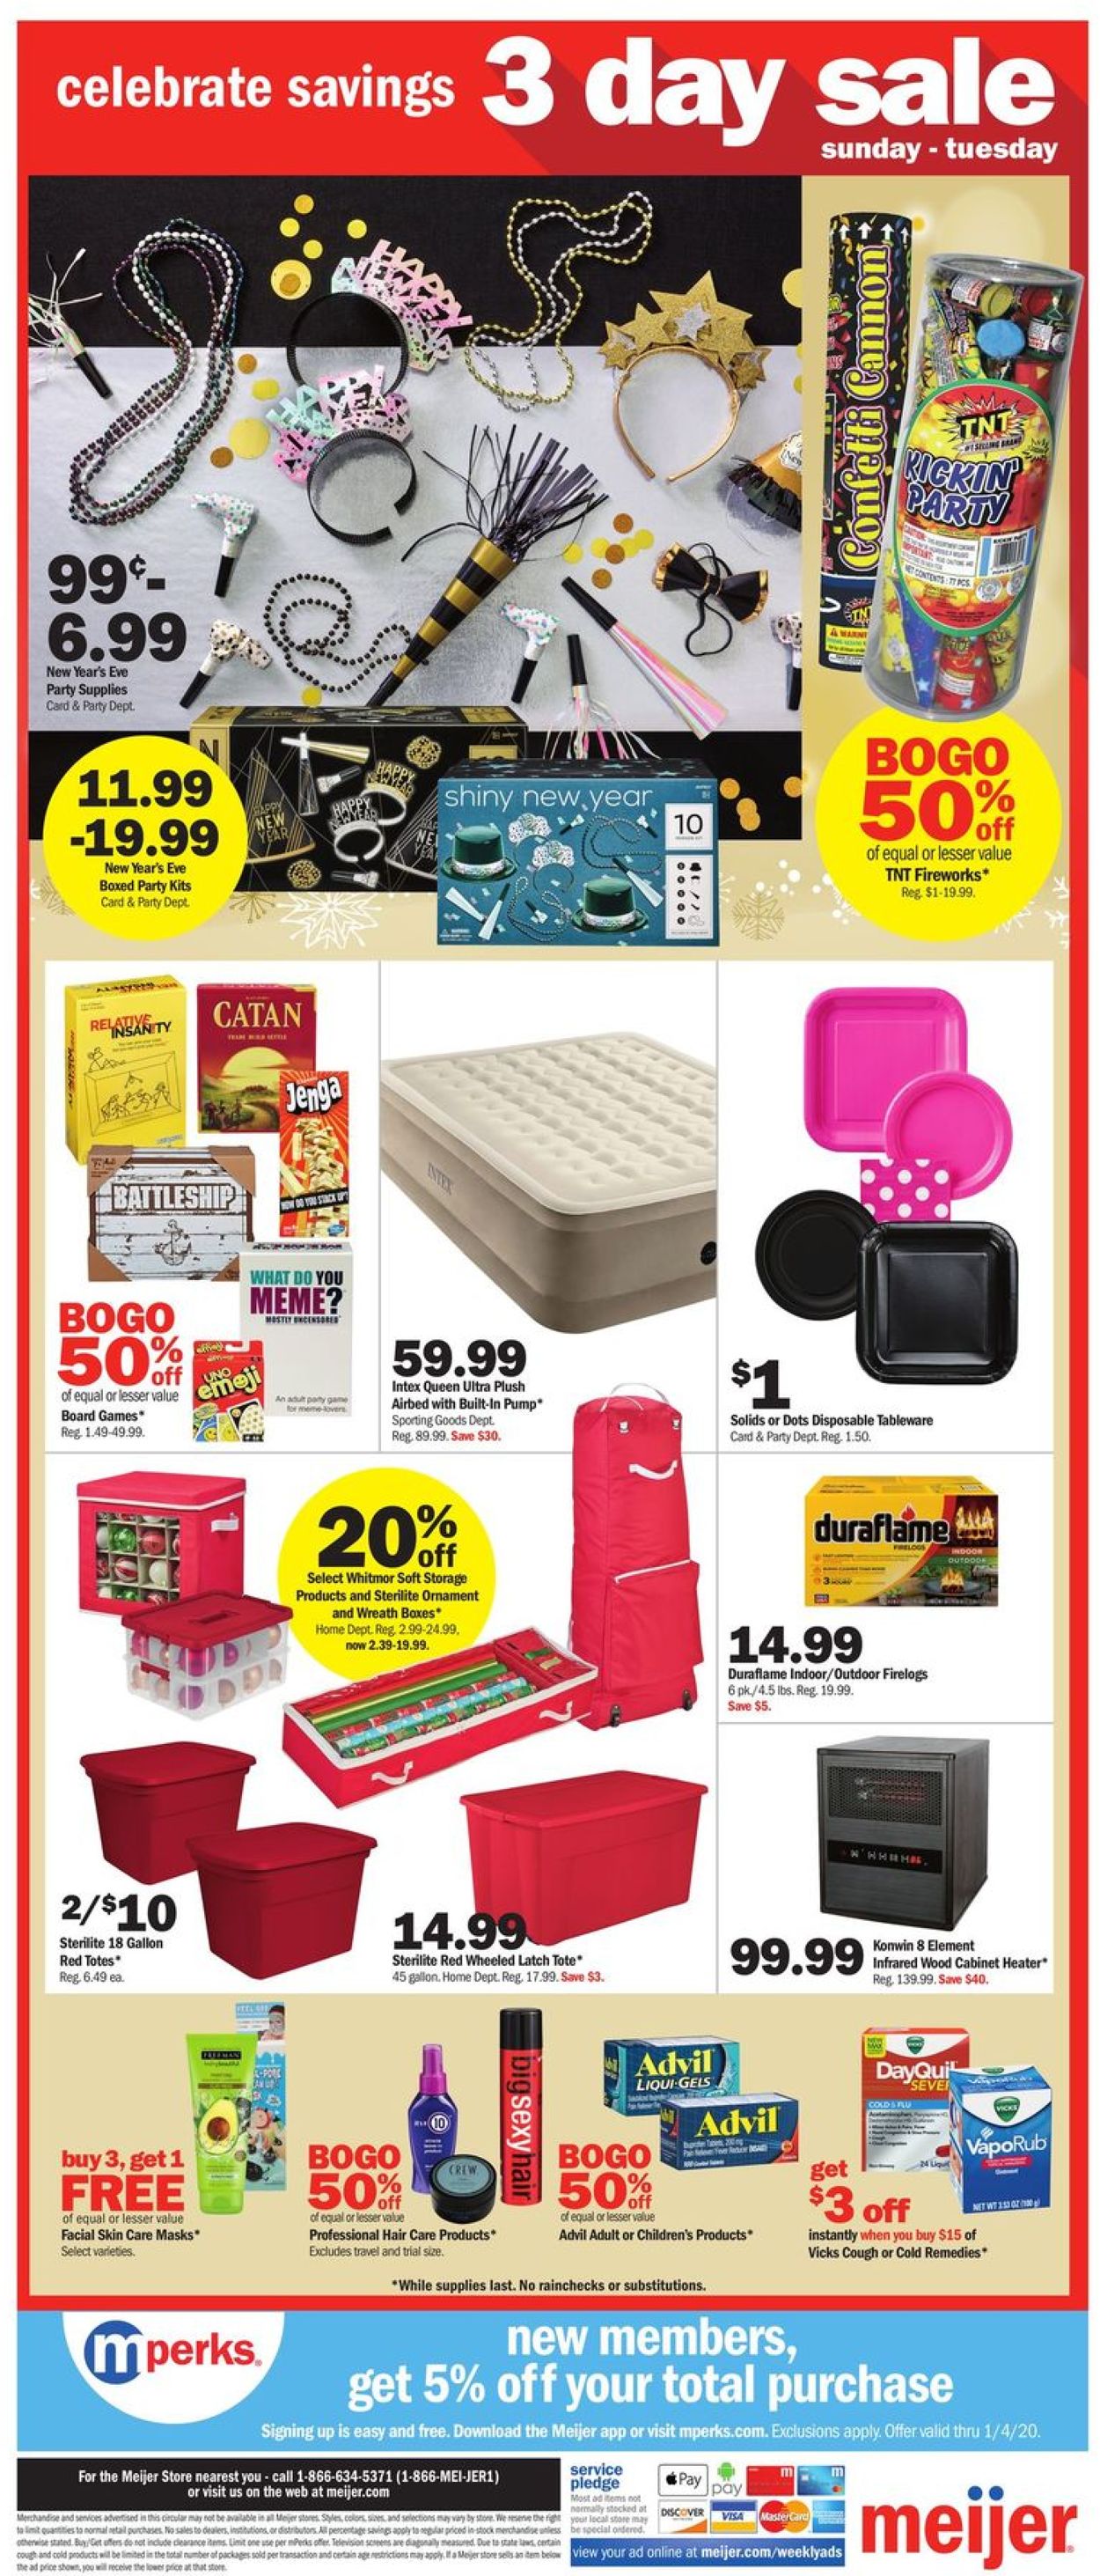 Meijer - New Year's Ad 2019 Weekly Ad Circular - valid 12/29-12/31/2019 (Page 2)